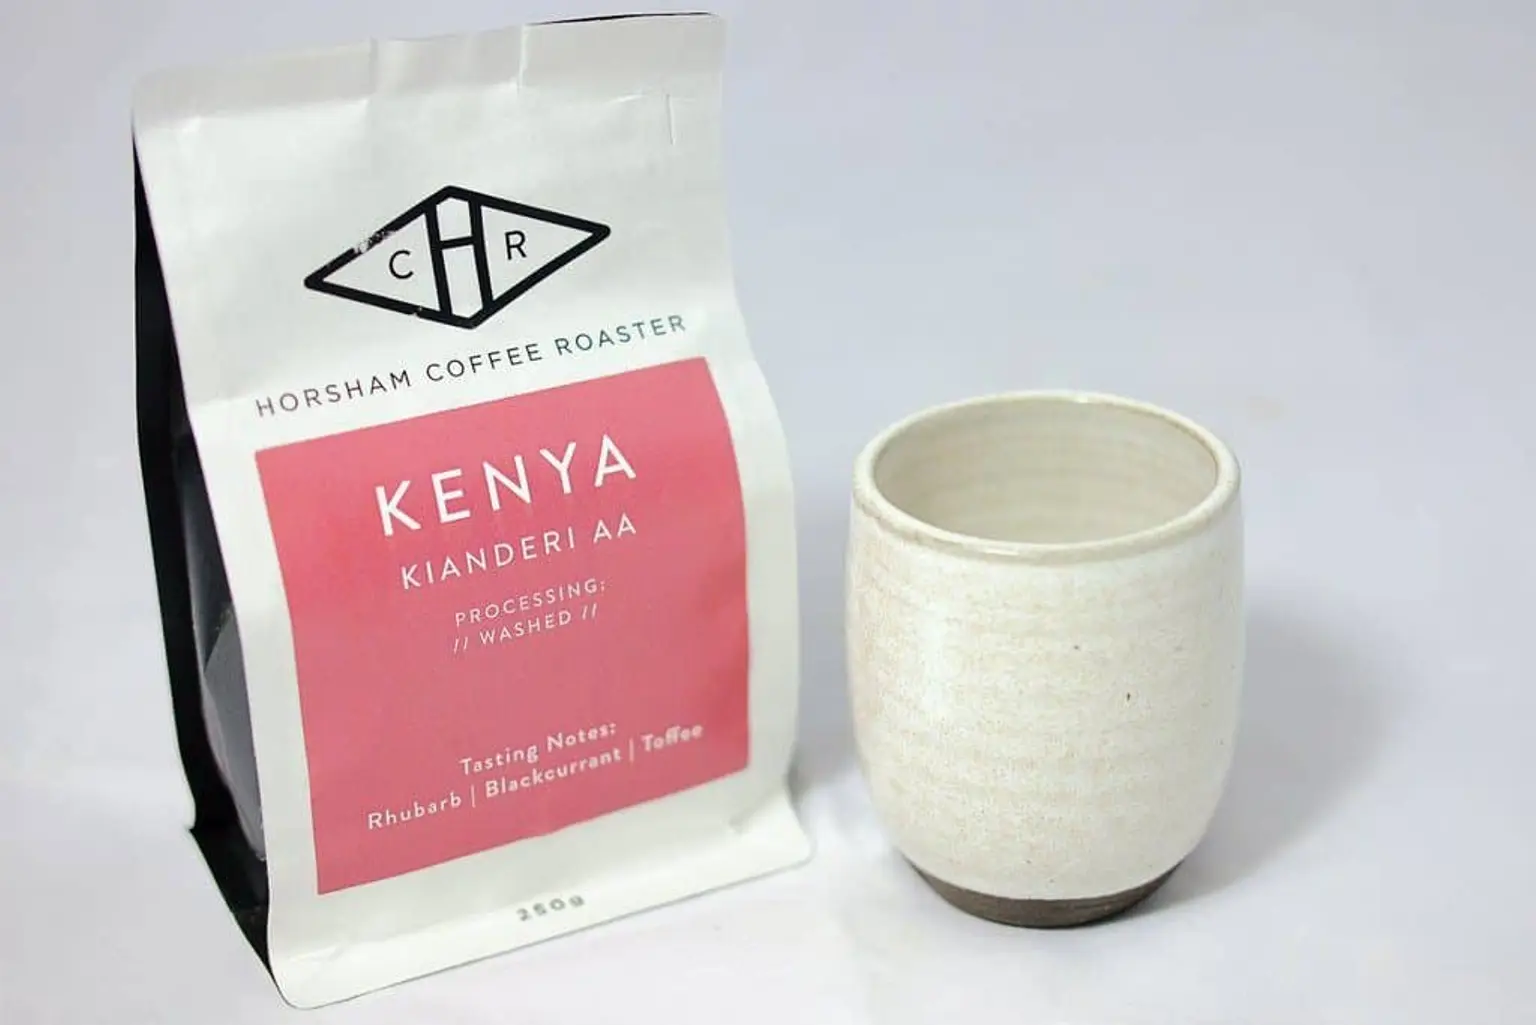 Ethically sourced, specialty coffee beans